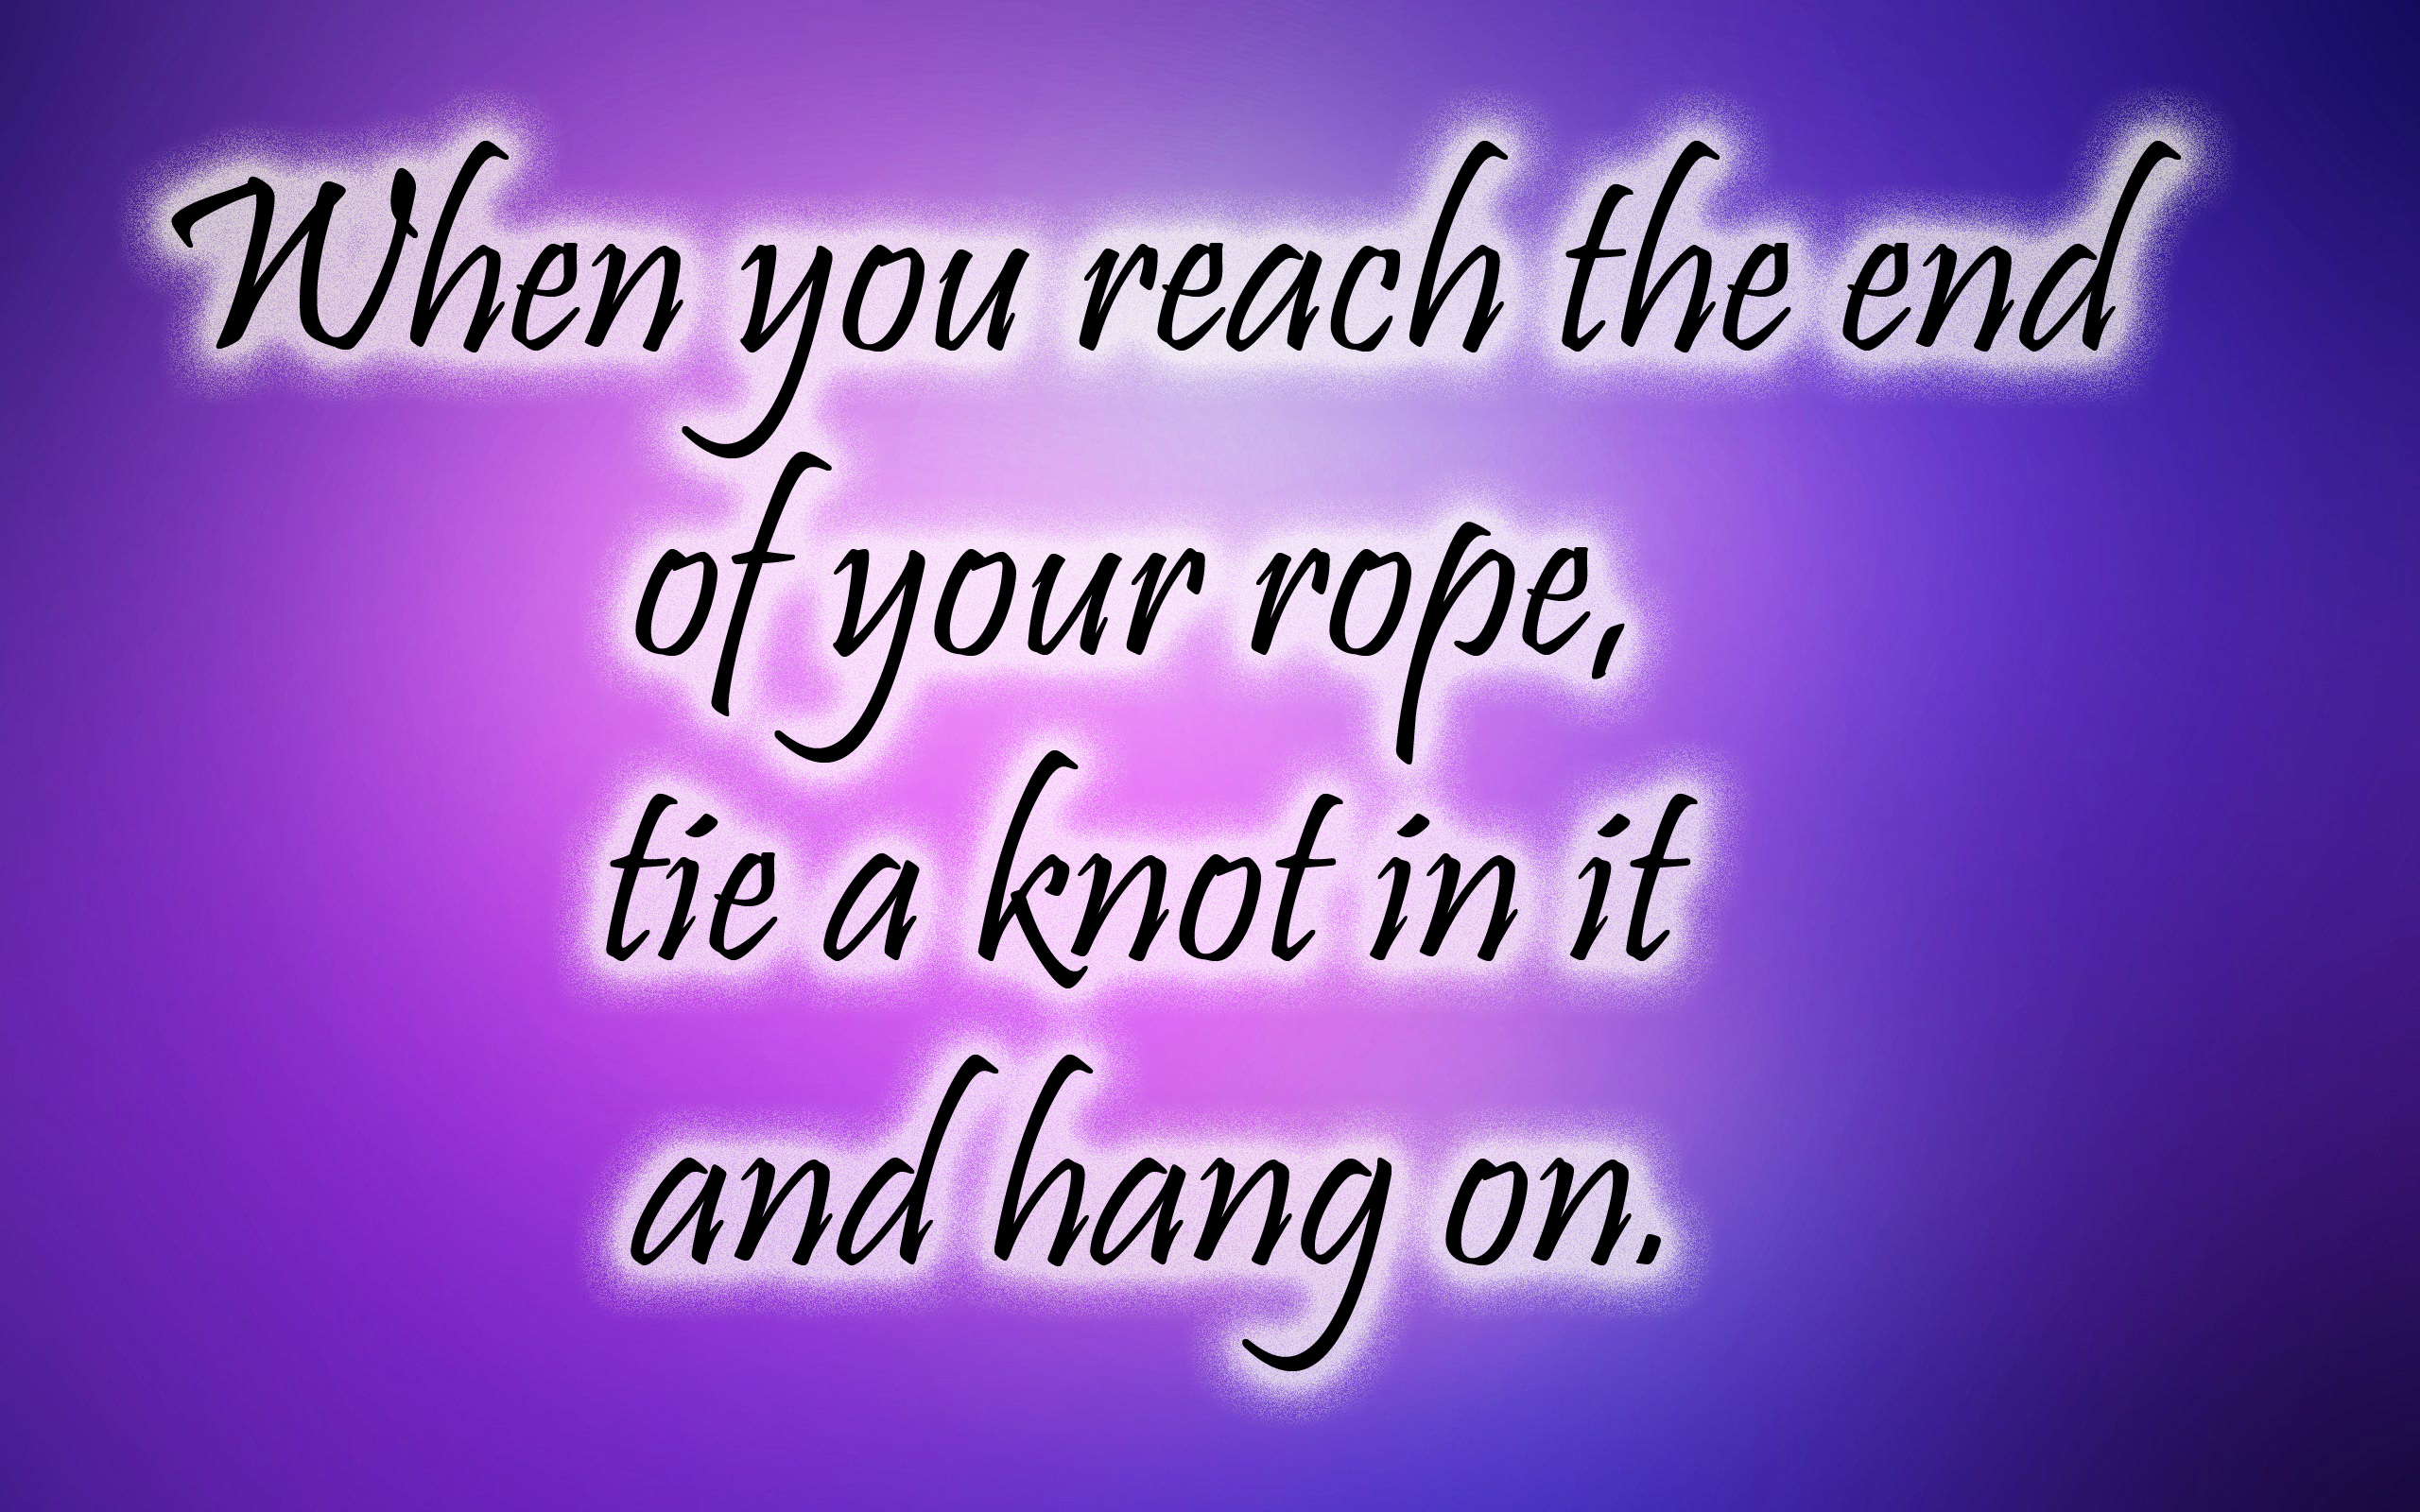 When you reach the end of your rope, tie a knot in it and hang on. quote